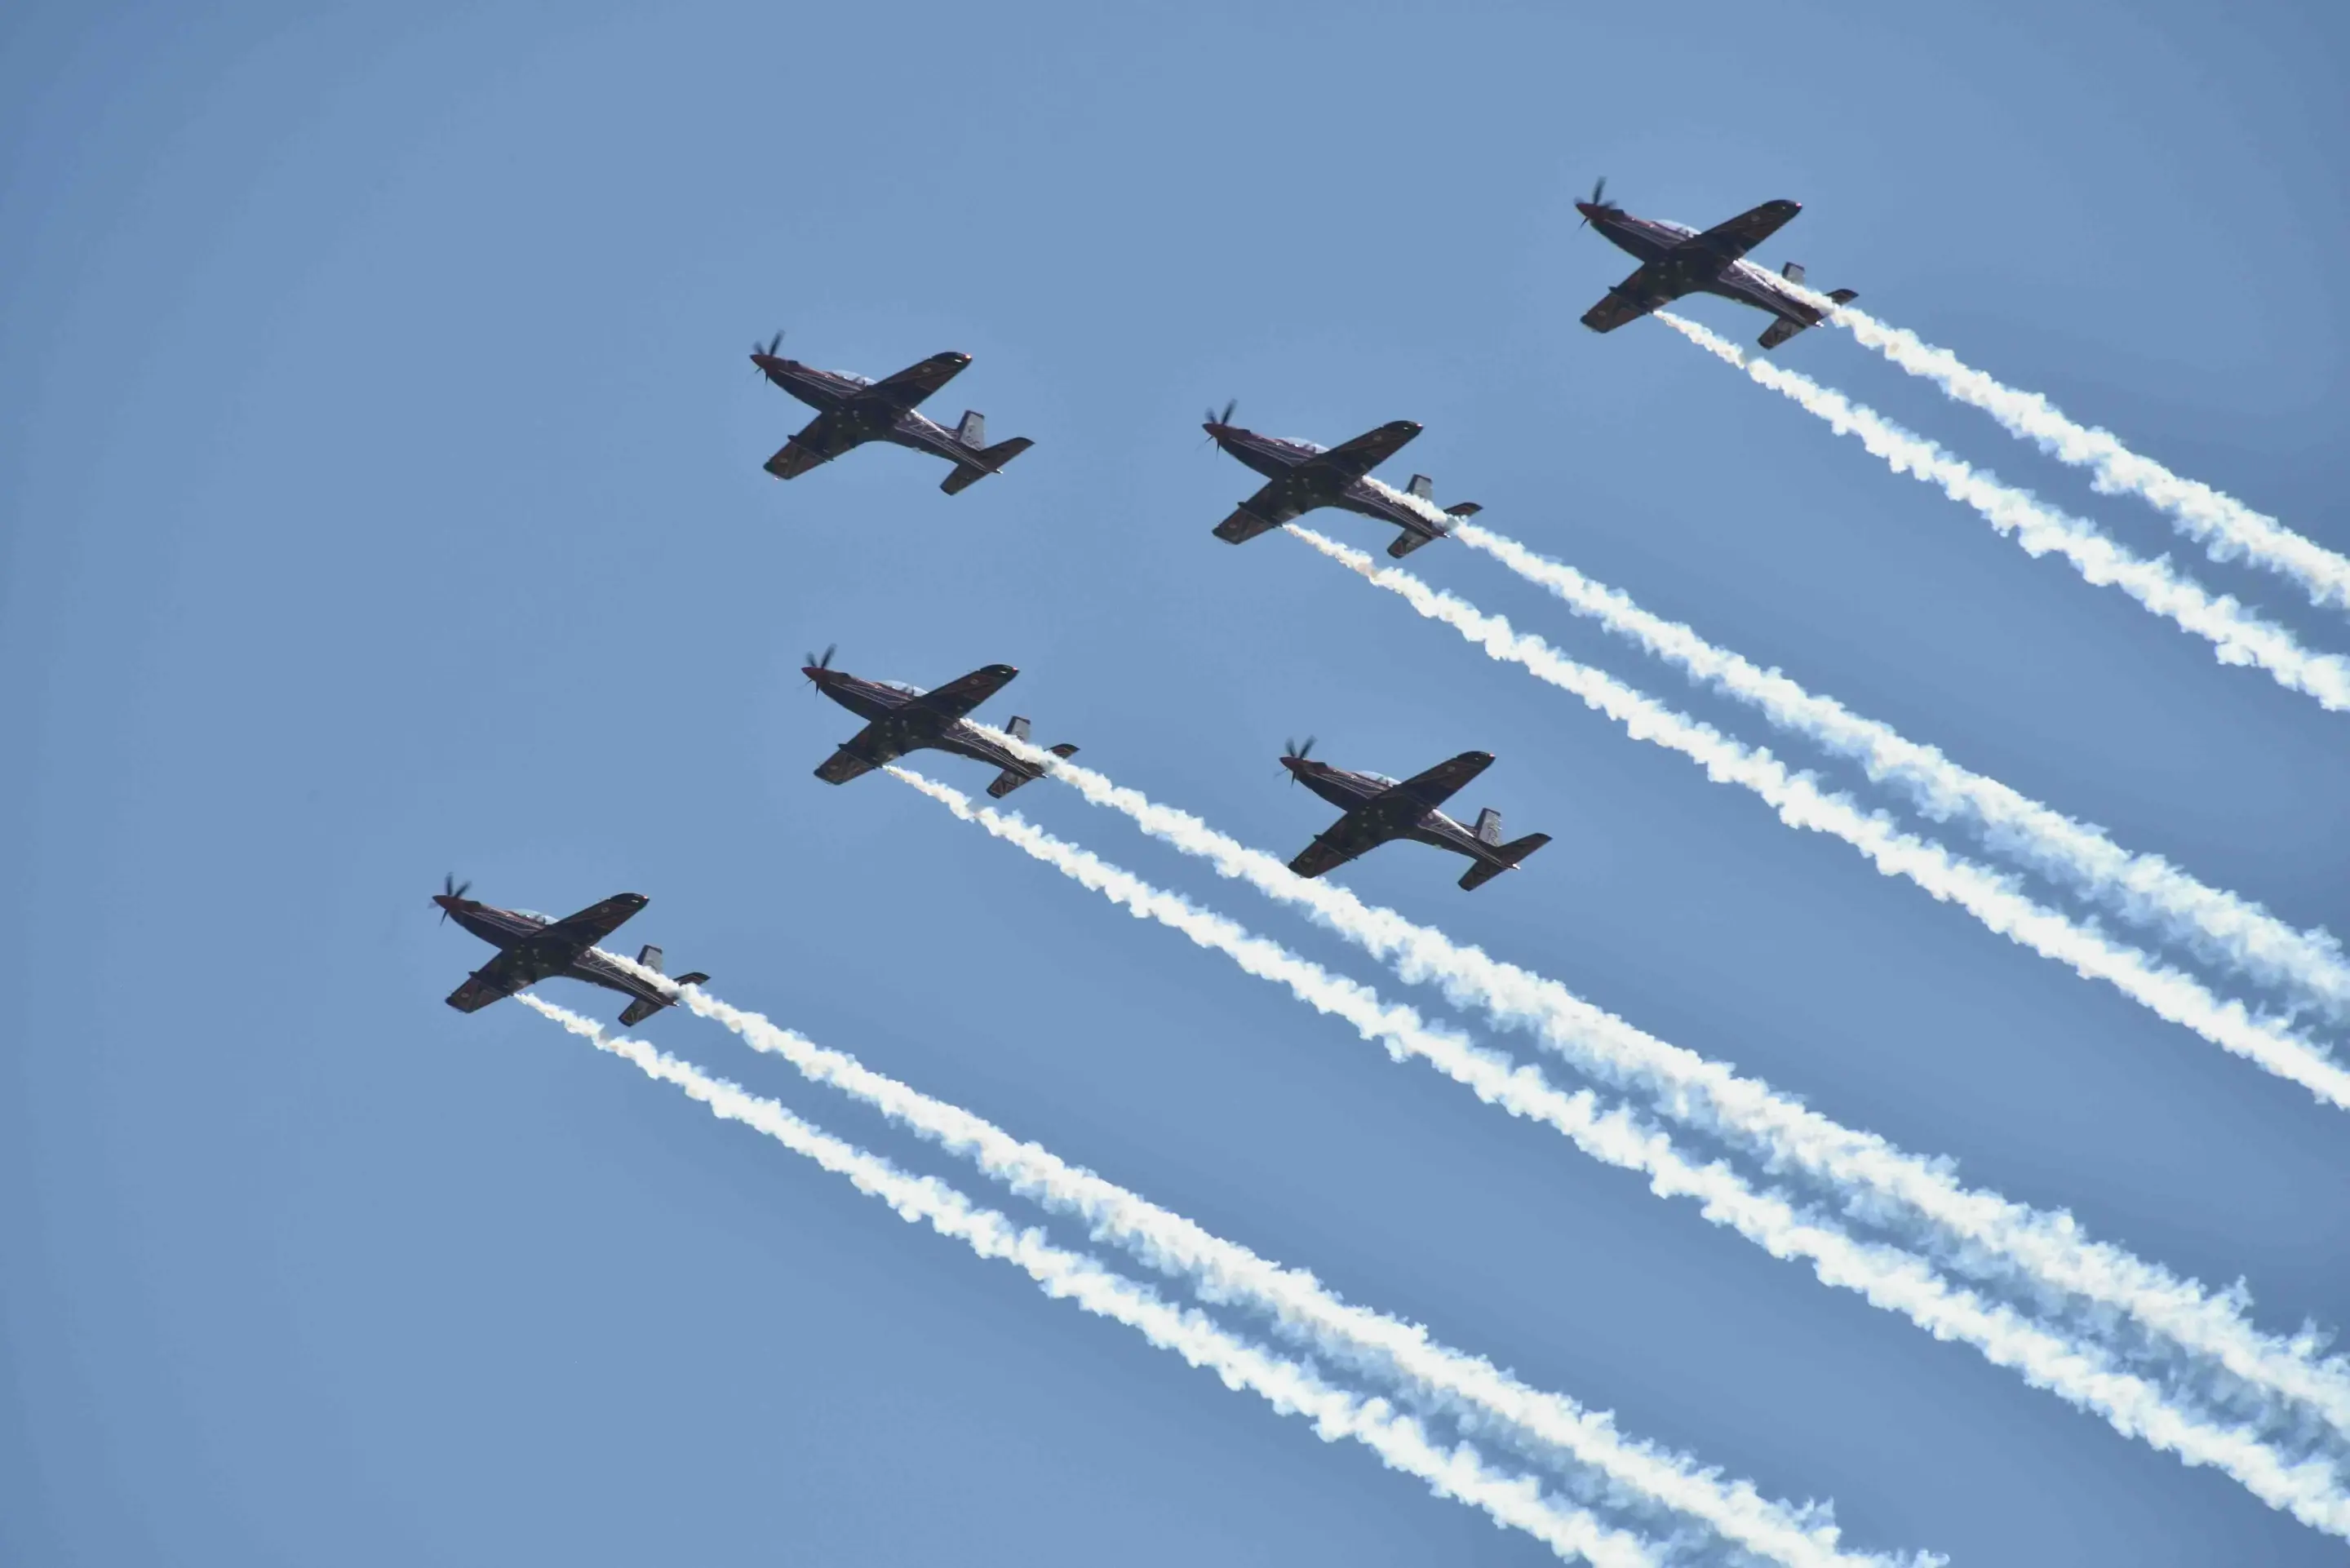 A formation of planes flying together 